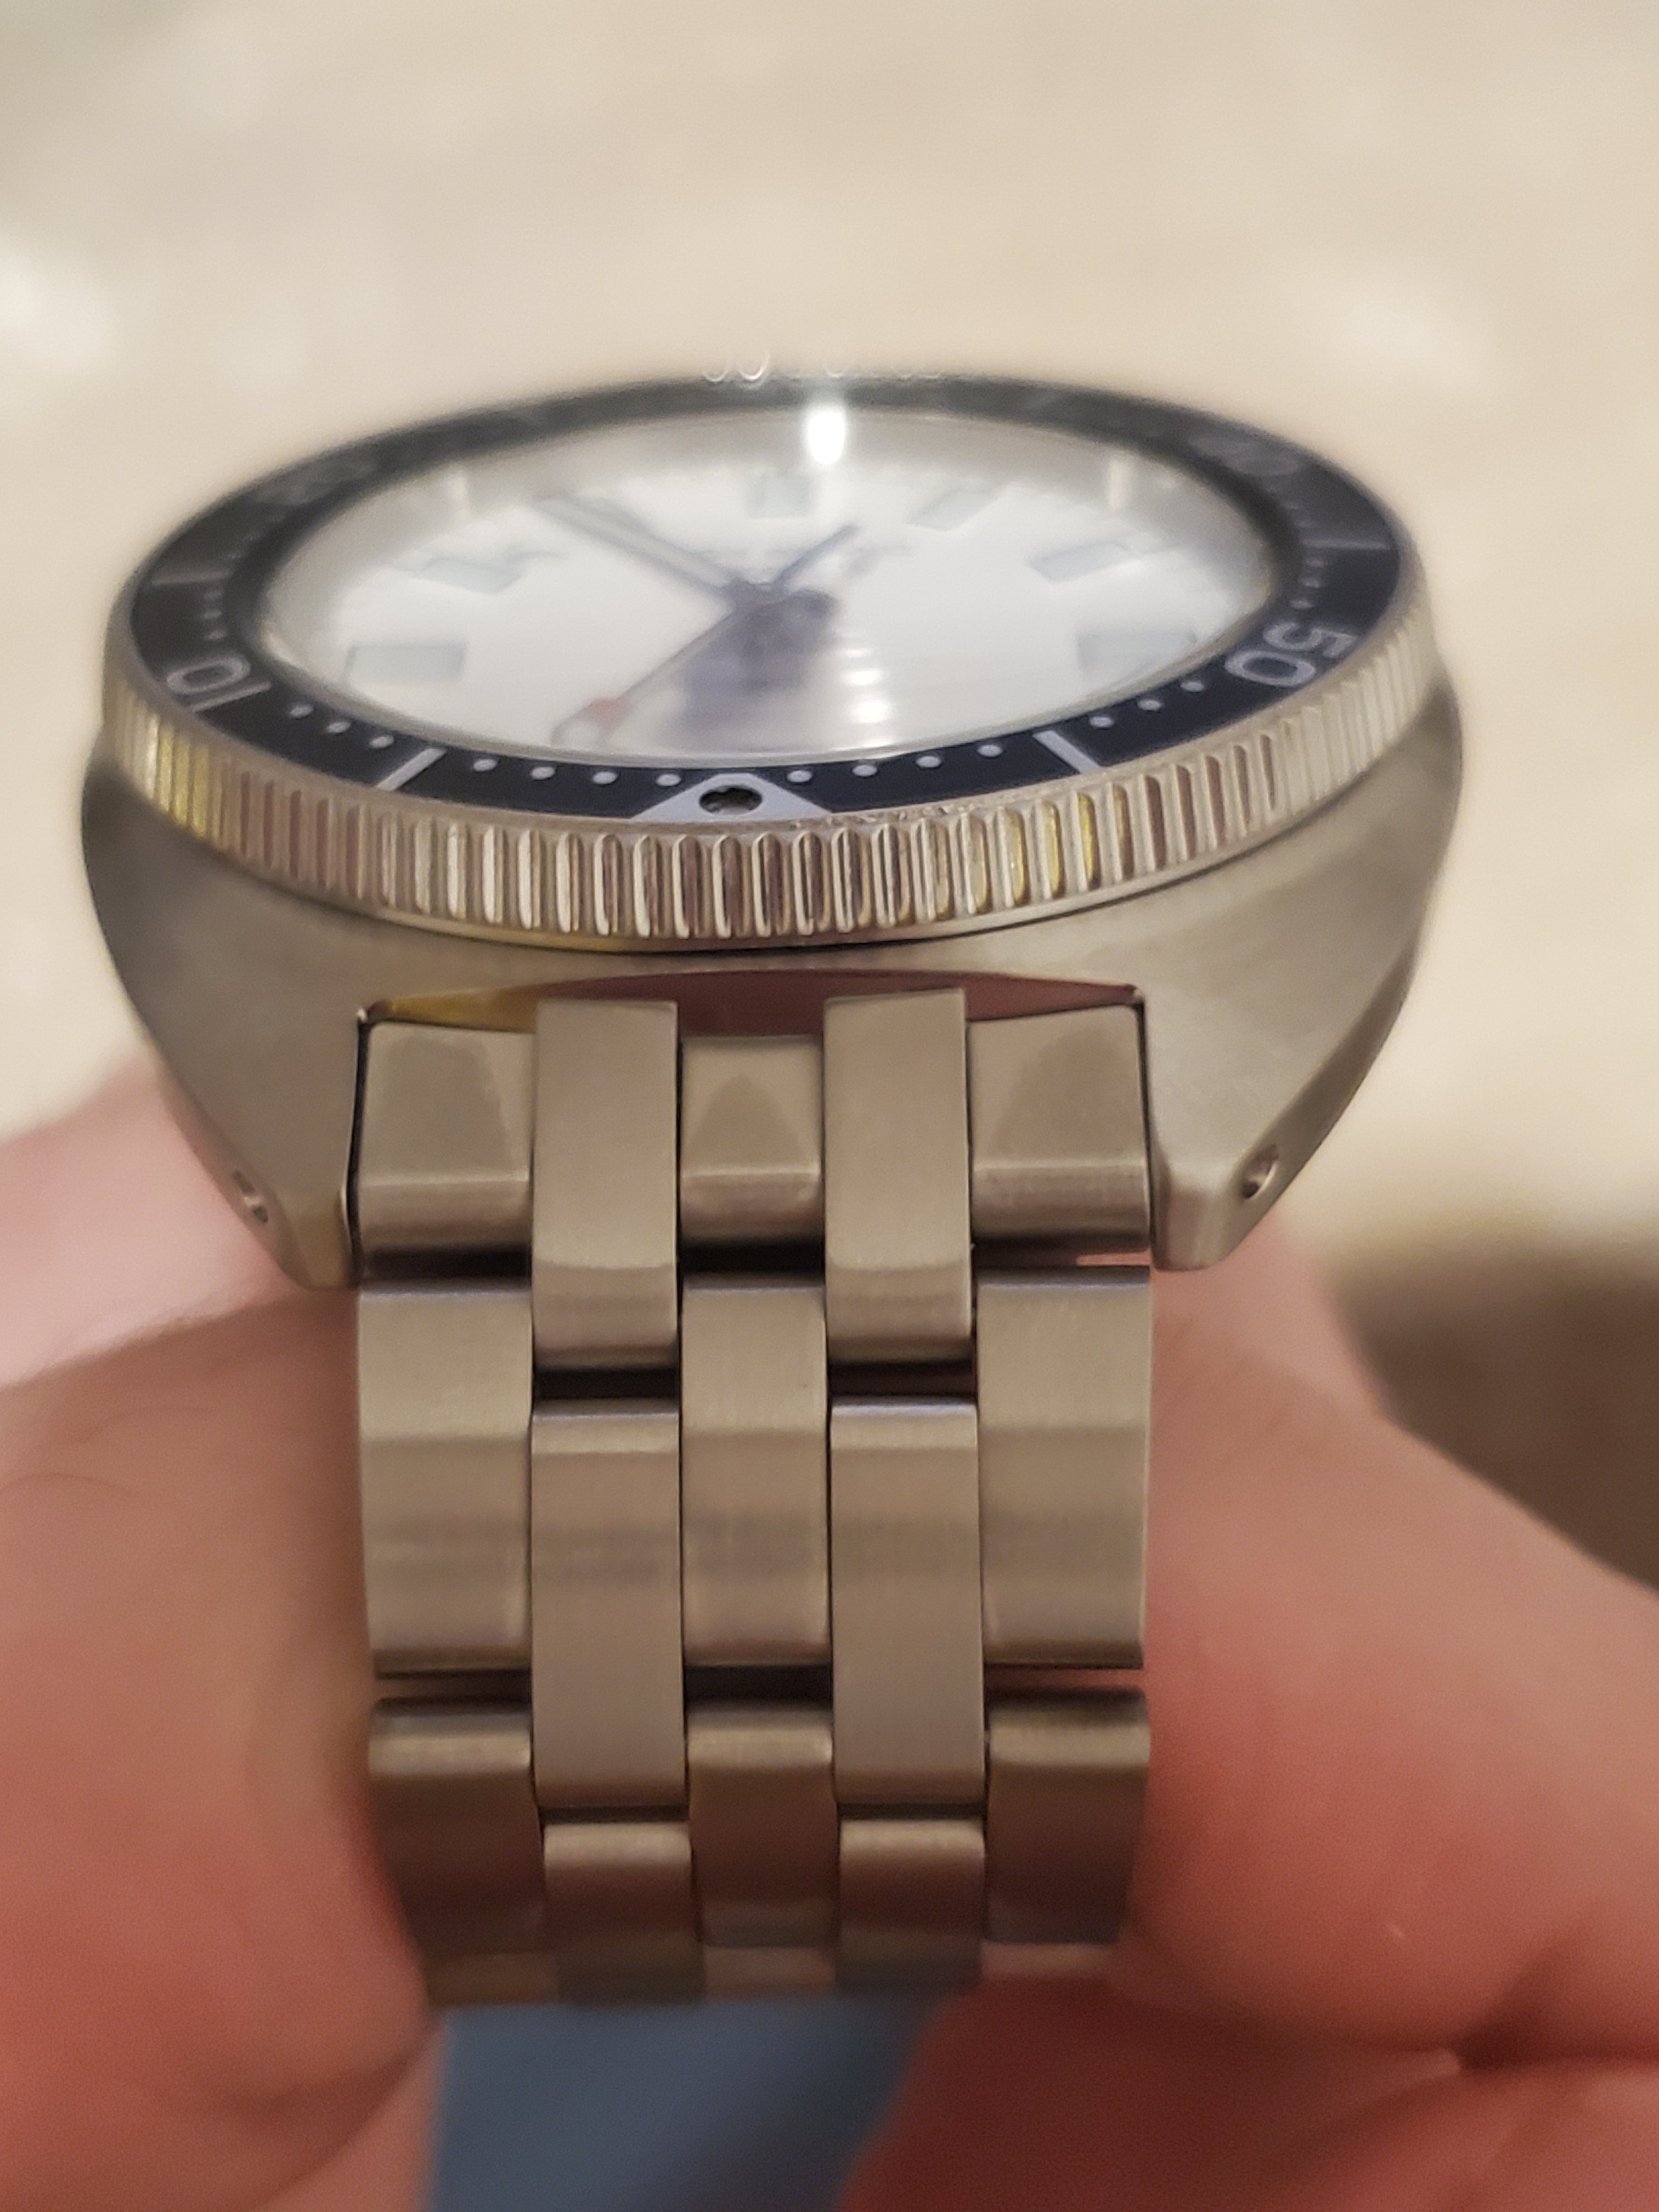 Diashield finishing on case and bracelet seem to not be fully coated on new  SBDC171/SPB313 | WatchUSeek Watch Forums